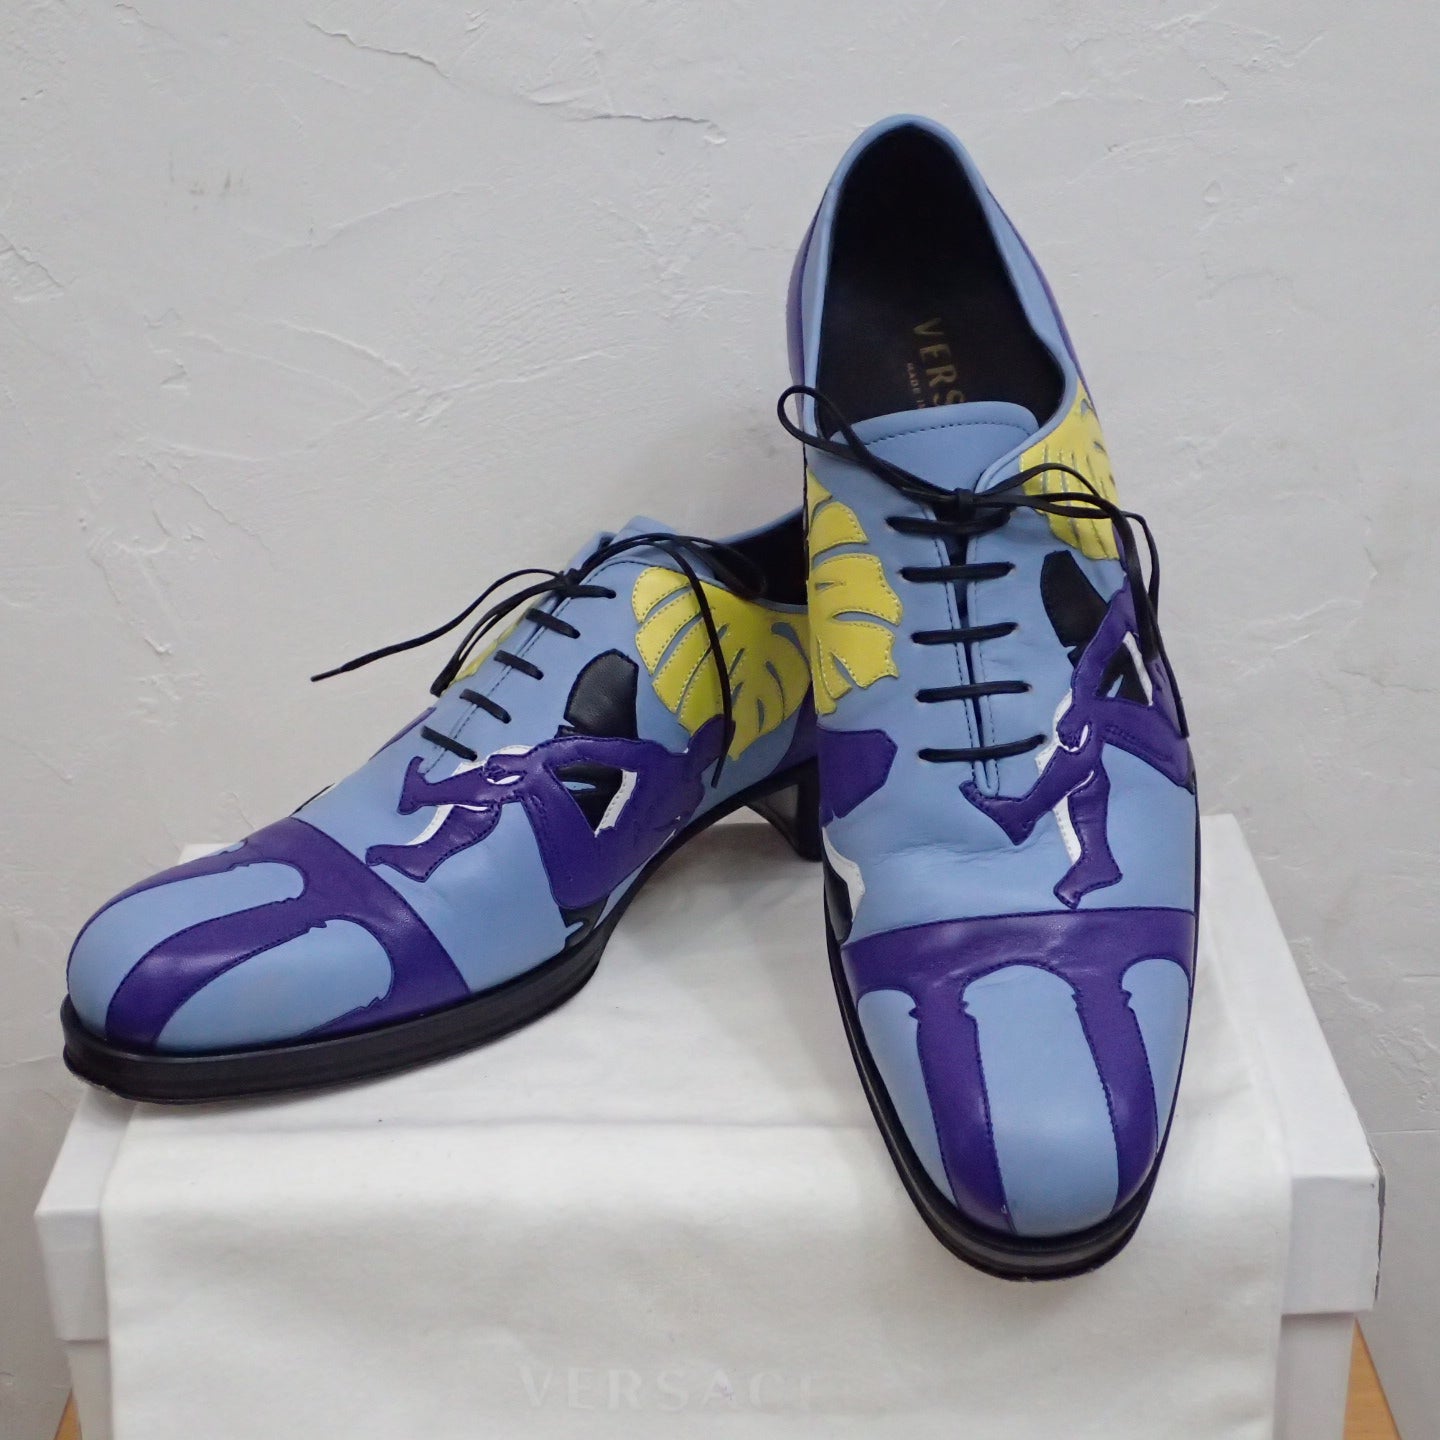 VERSACE Cuba Collection Leather Shoes 2015 SS